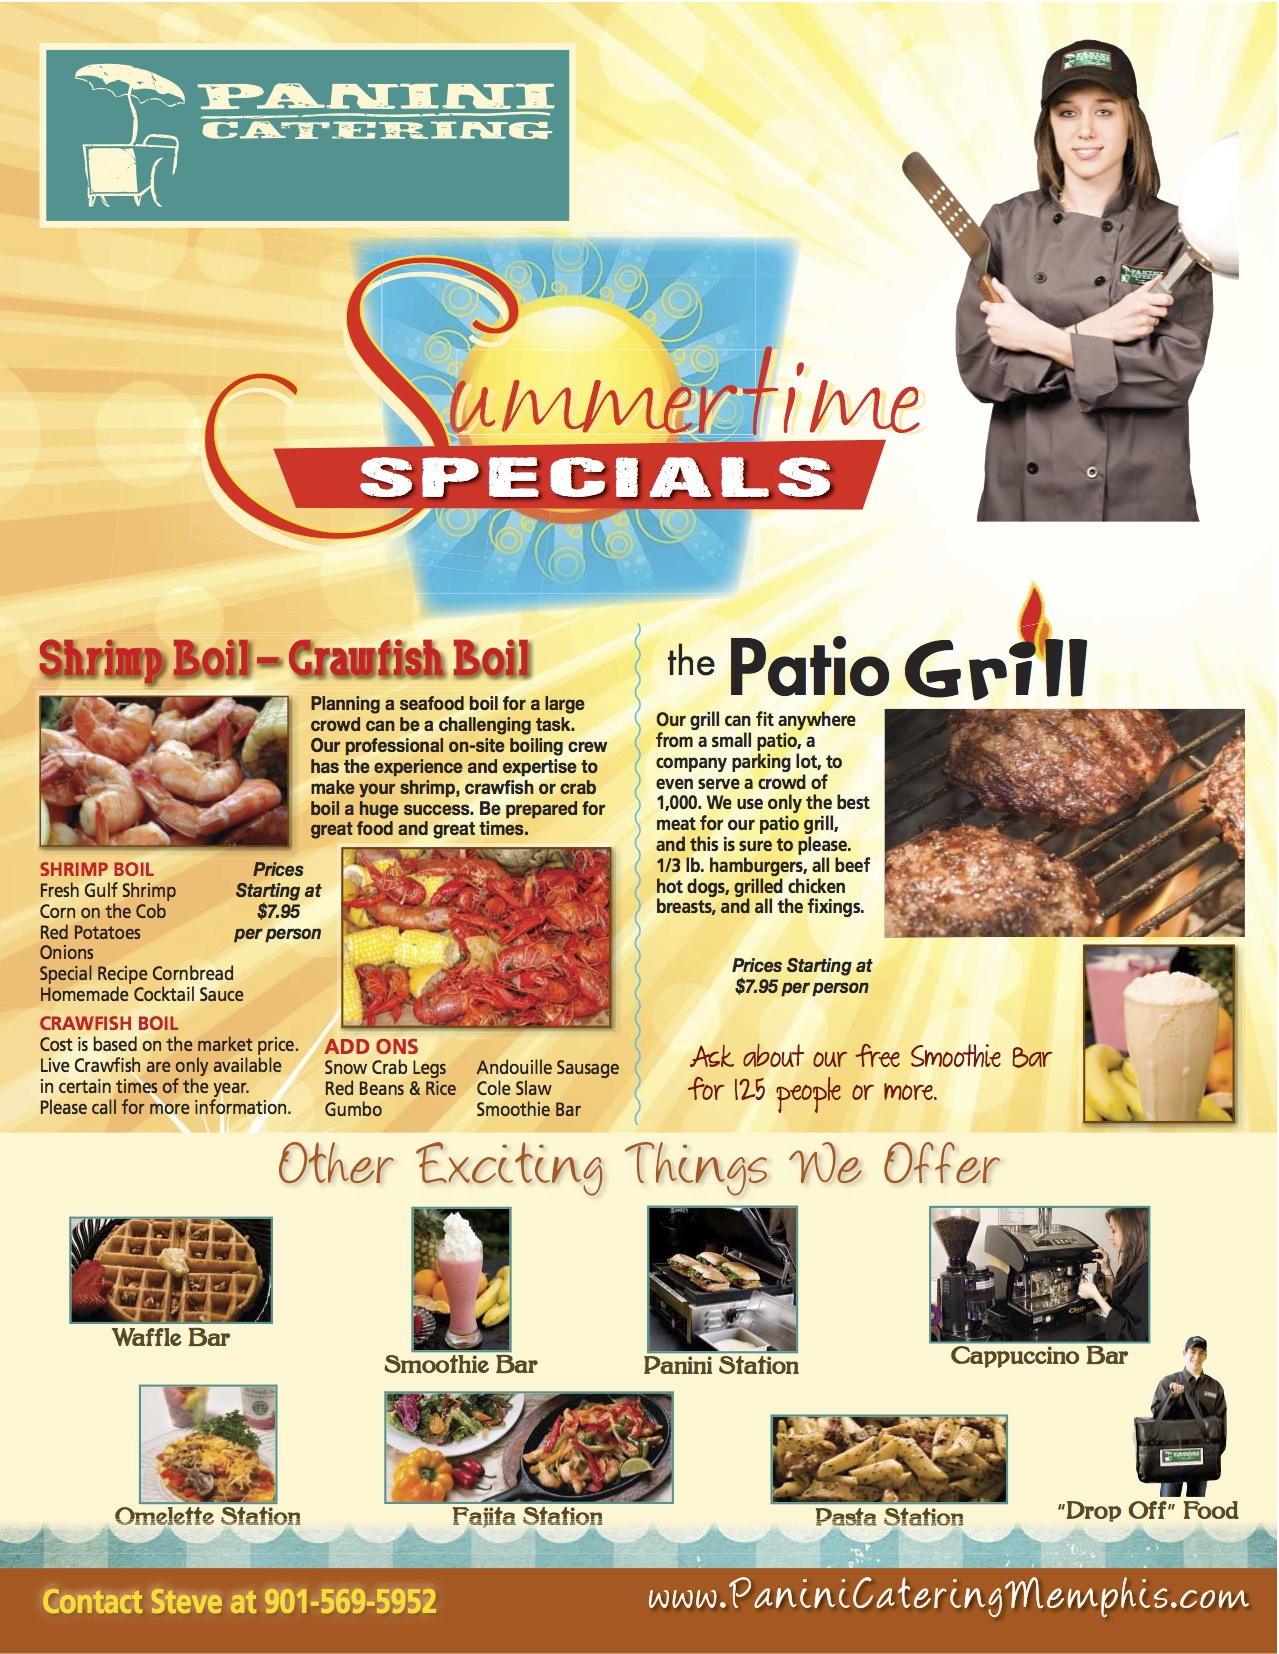 Summertime Catering Specials includes FREE Smoothie Bar.